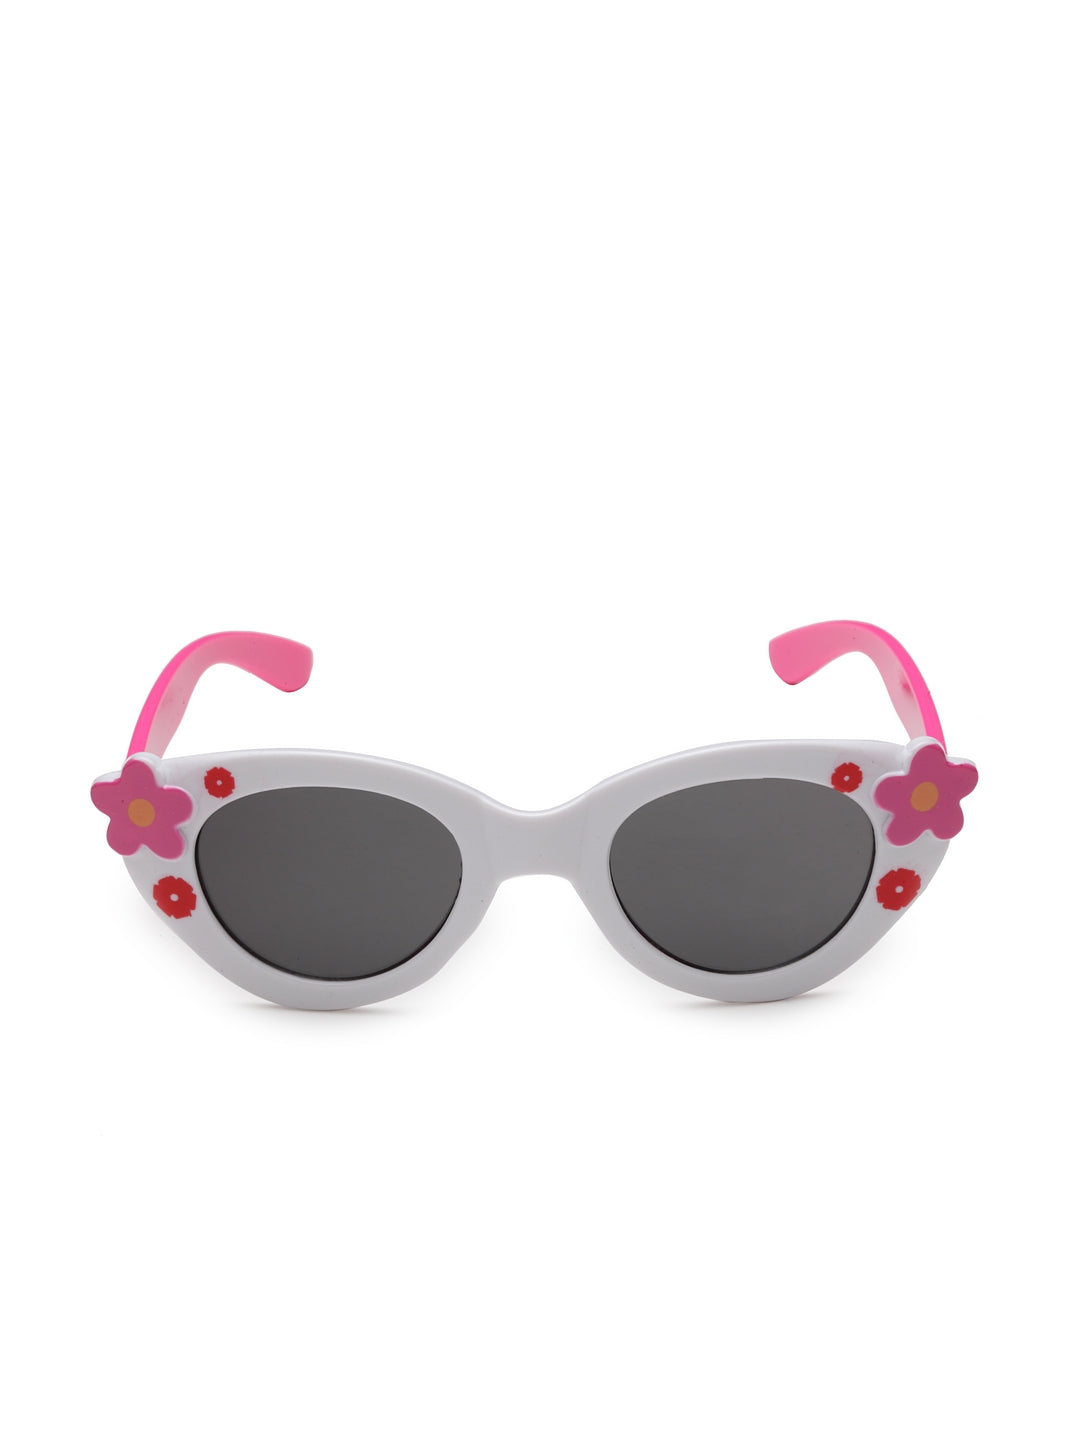 Stol'n Premium Attractive Fashionable UV-Protected Oval shape Sunglasses - Pink and White